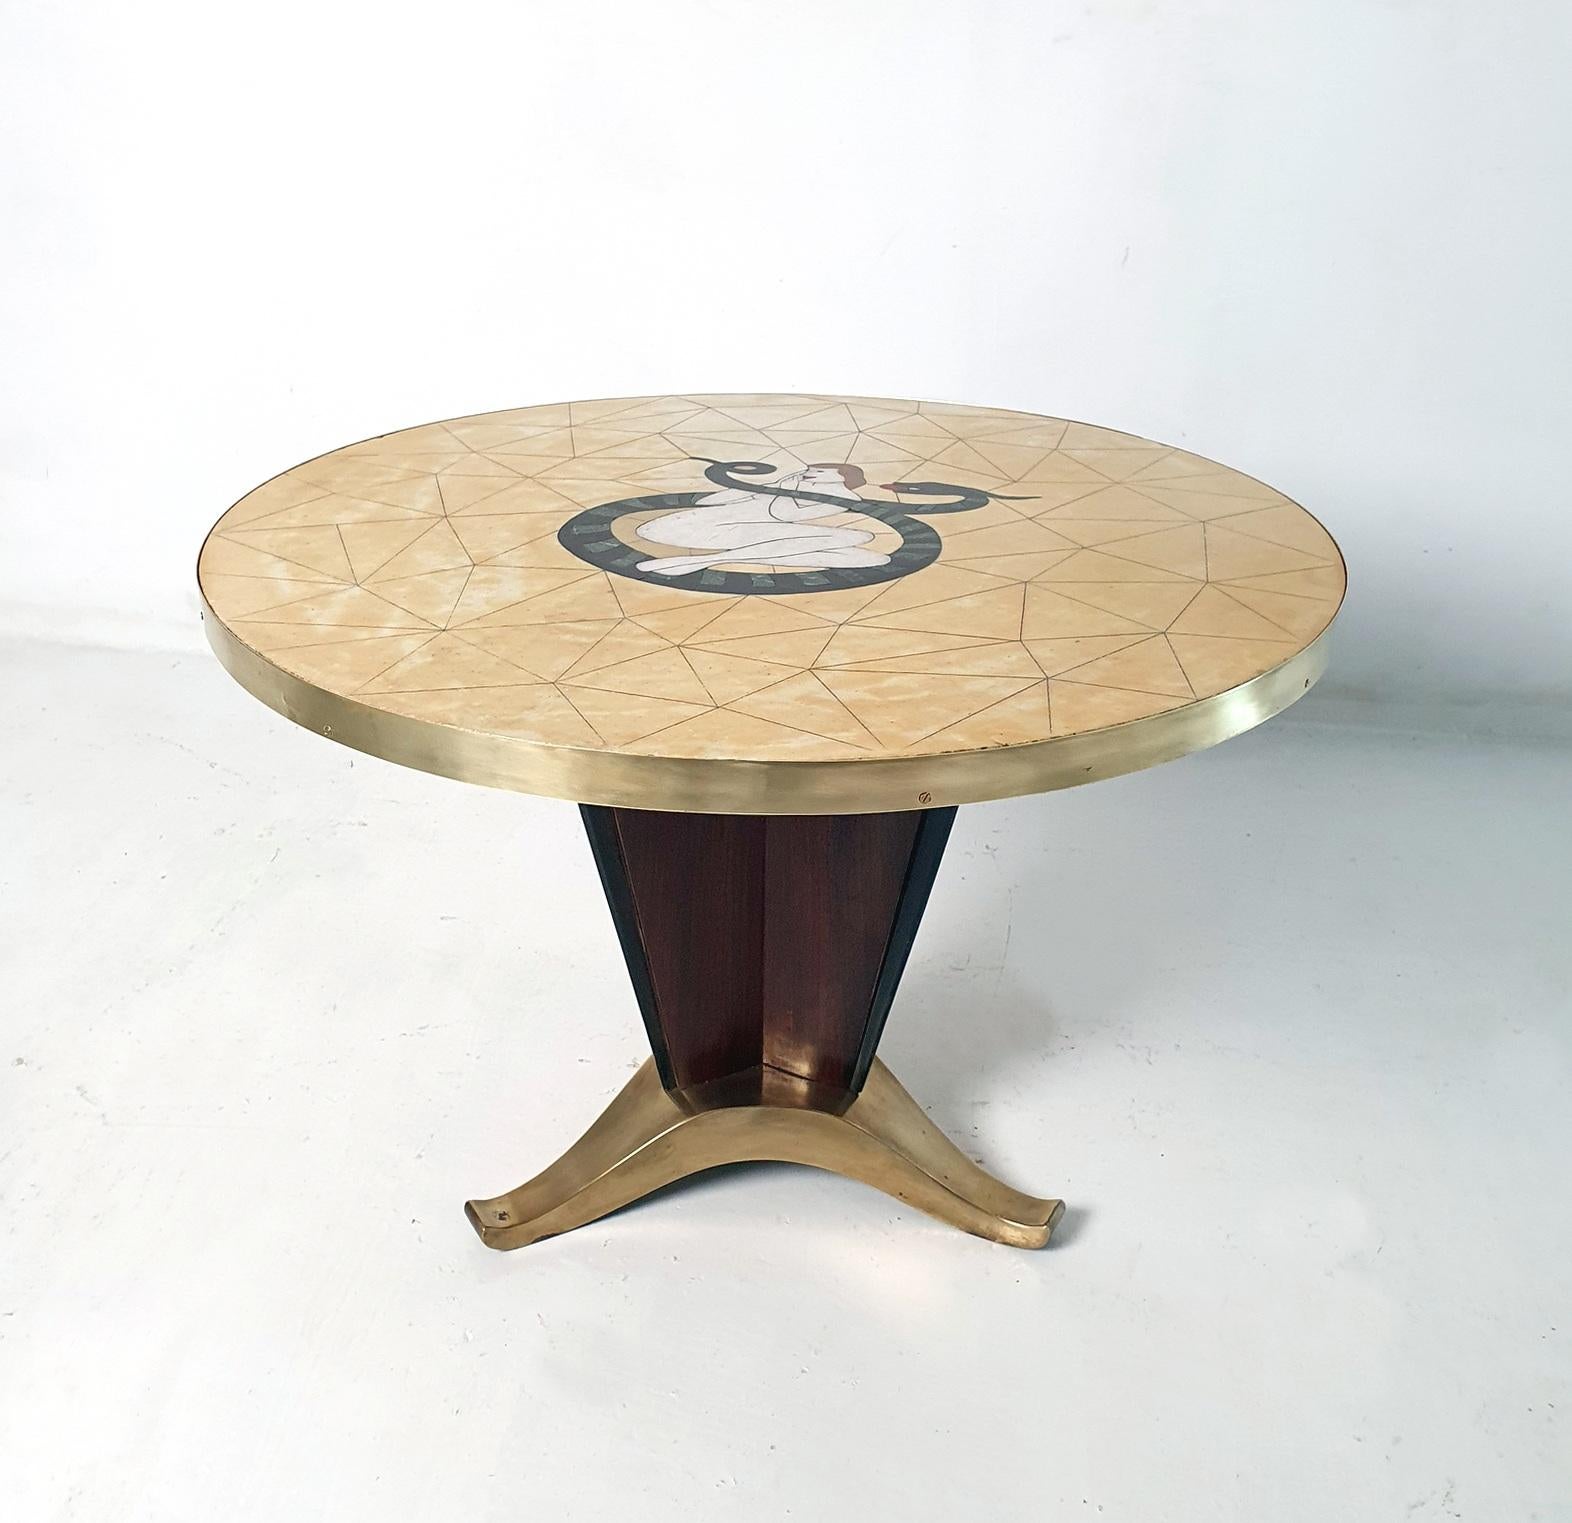 This stunning round coffee table from the late 1940s boasts a one-of-a-kind design. The solid cast tripod foot with a pillar made from maple wood in a rich brown color with black details leads up to the magnificent top. Crafted from alabaster, the